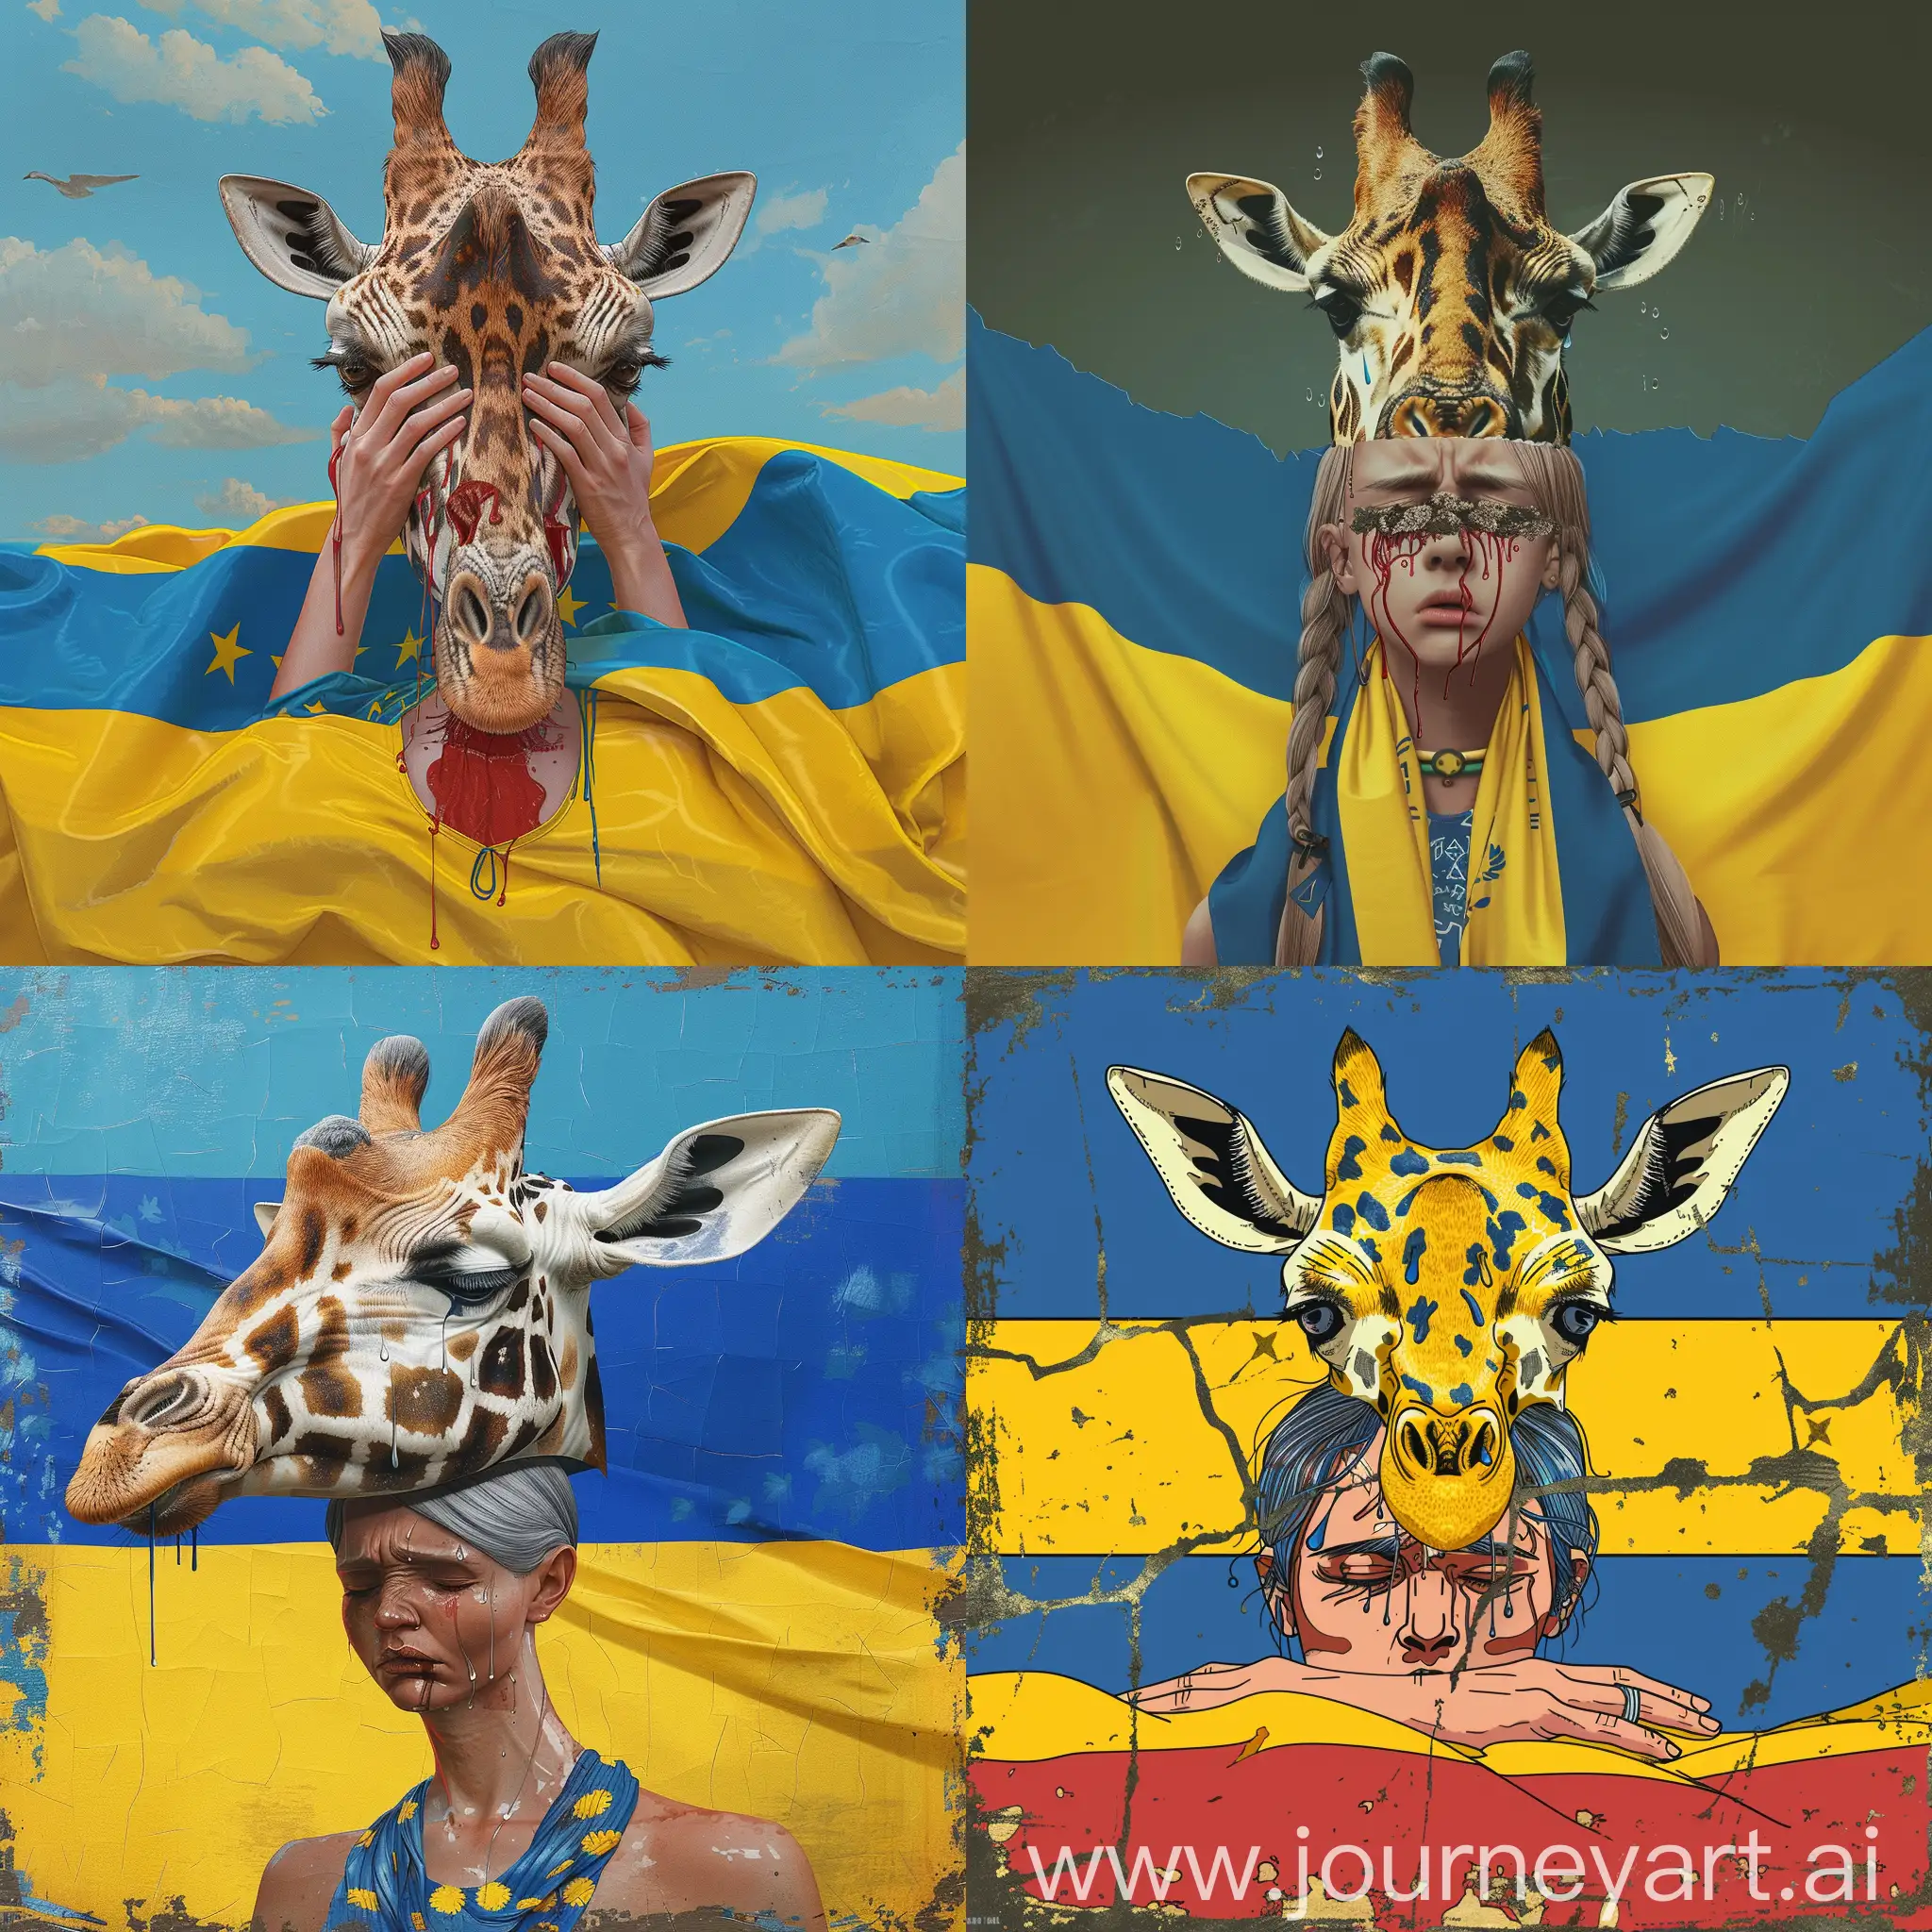 create a girl with the head of a giraffe crying over the flag of Ukraine